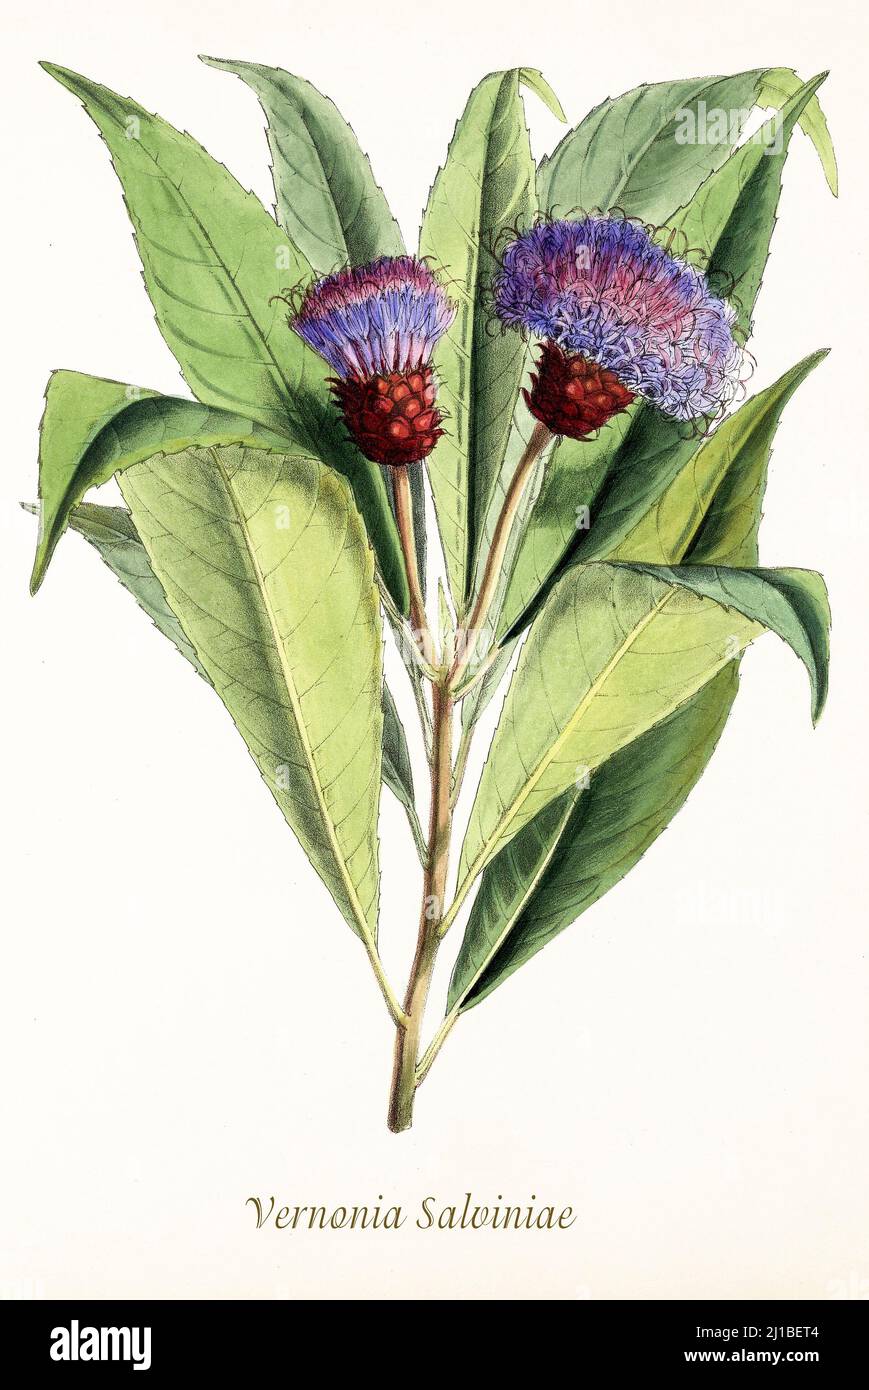 A late 18th century illustration of Vernonia Salviniae, a species of perennial plant from family Asteraceae found in United States and Canada. From Biologia Centrali-Americana, aka Contributions to the knowledge of the fauna and flora of Mexico and Central America by William Botting. Published in London in 1879 Stock Photo